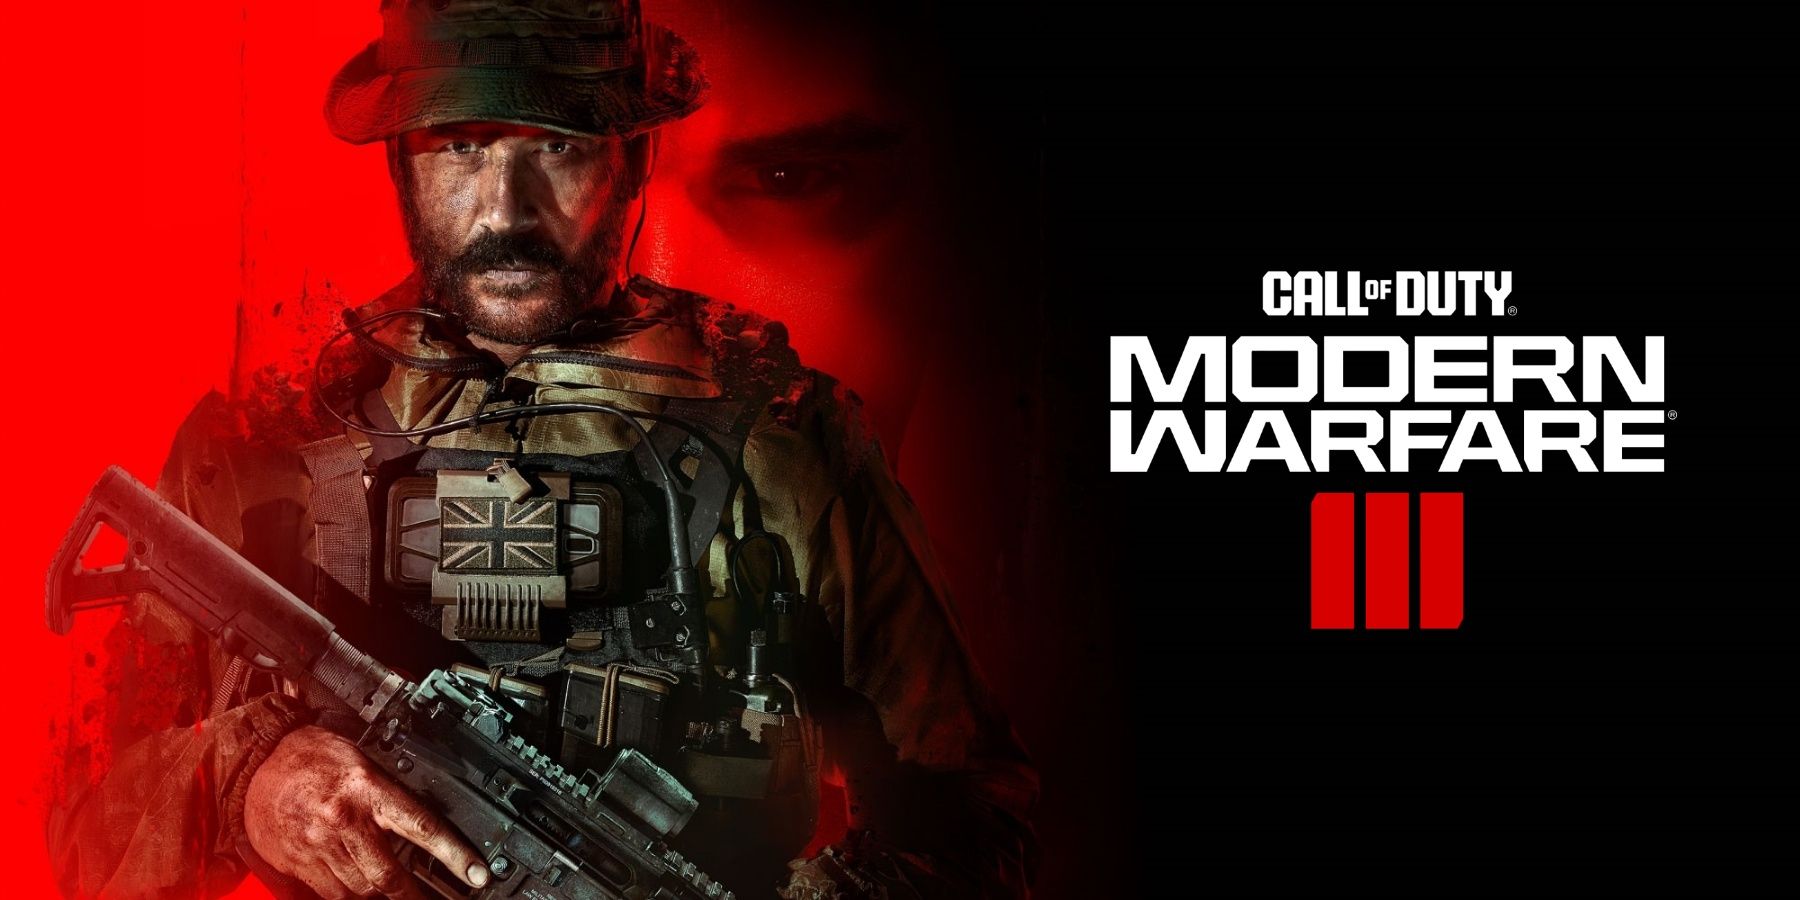 call-of-duty-modern-warfare-campaign-length-revealed-the-tech-game